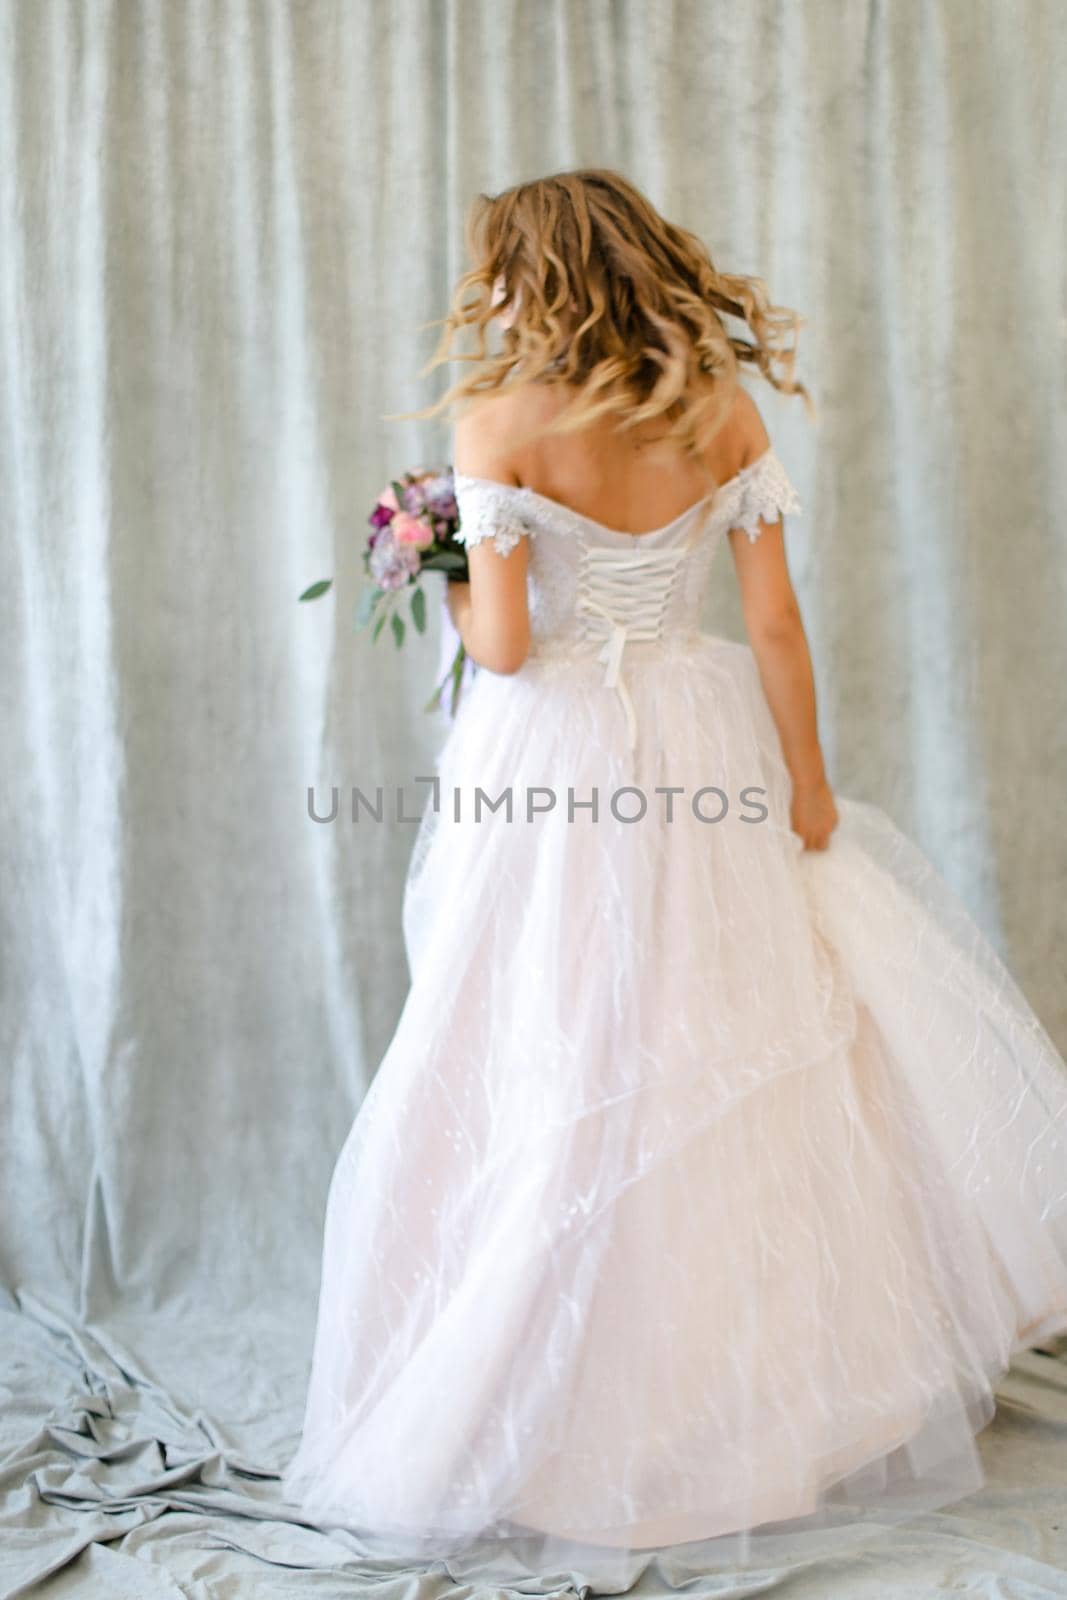 Back view of young bride standing at studio with flowers. Concept of wedding and bridal photo sesion, fashion.